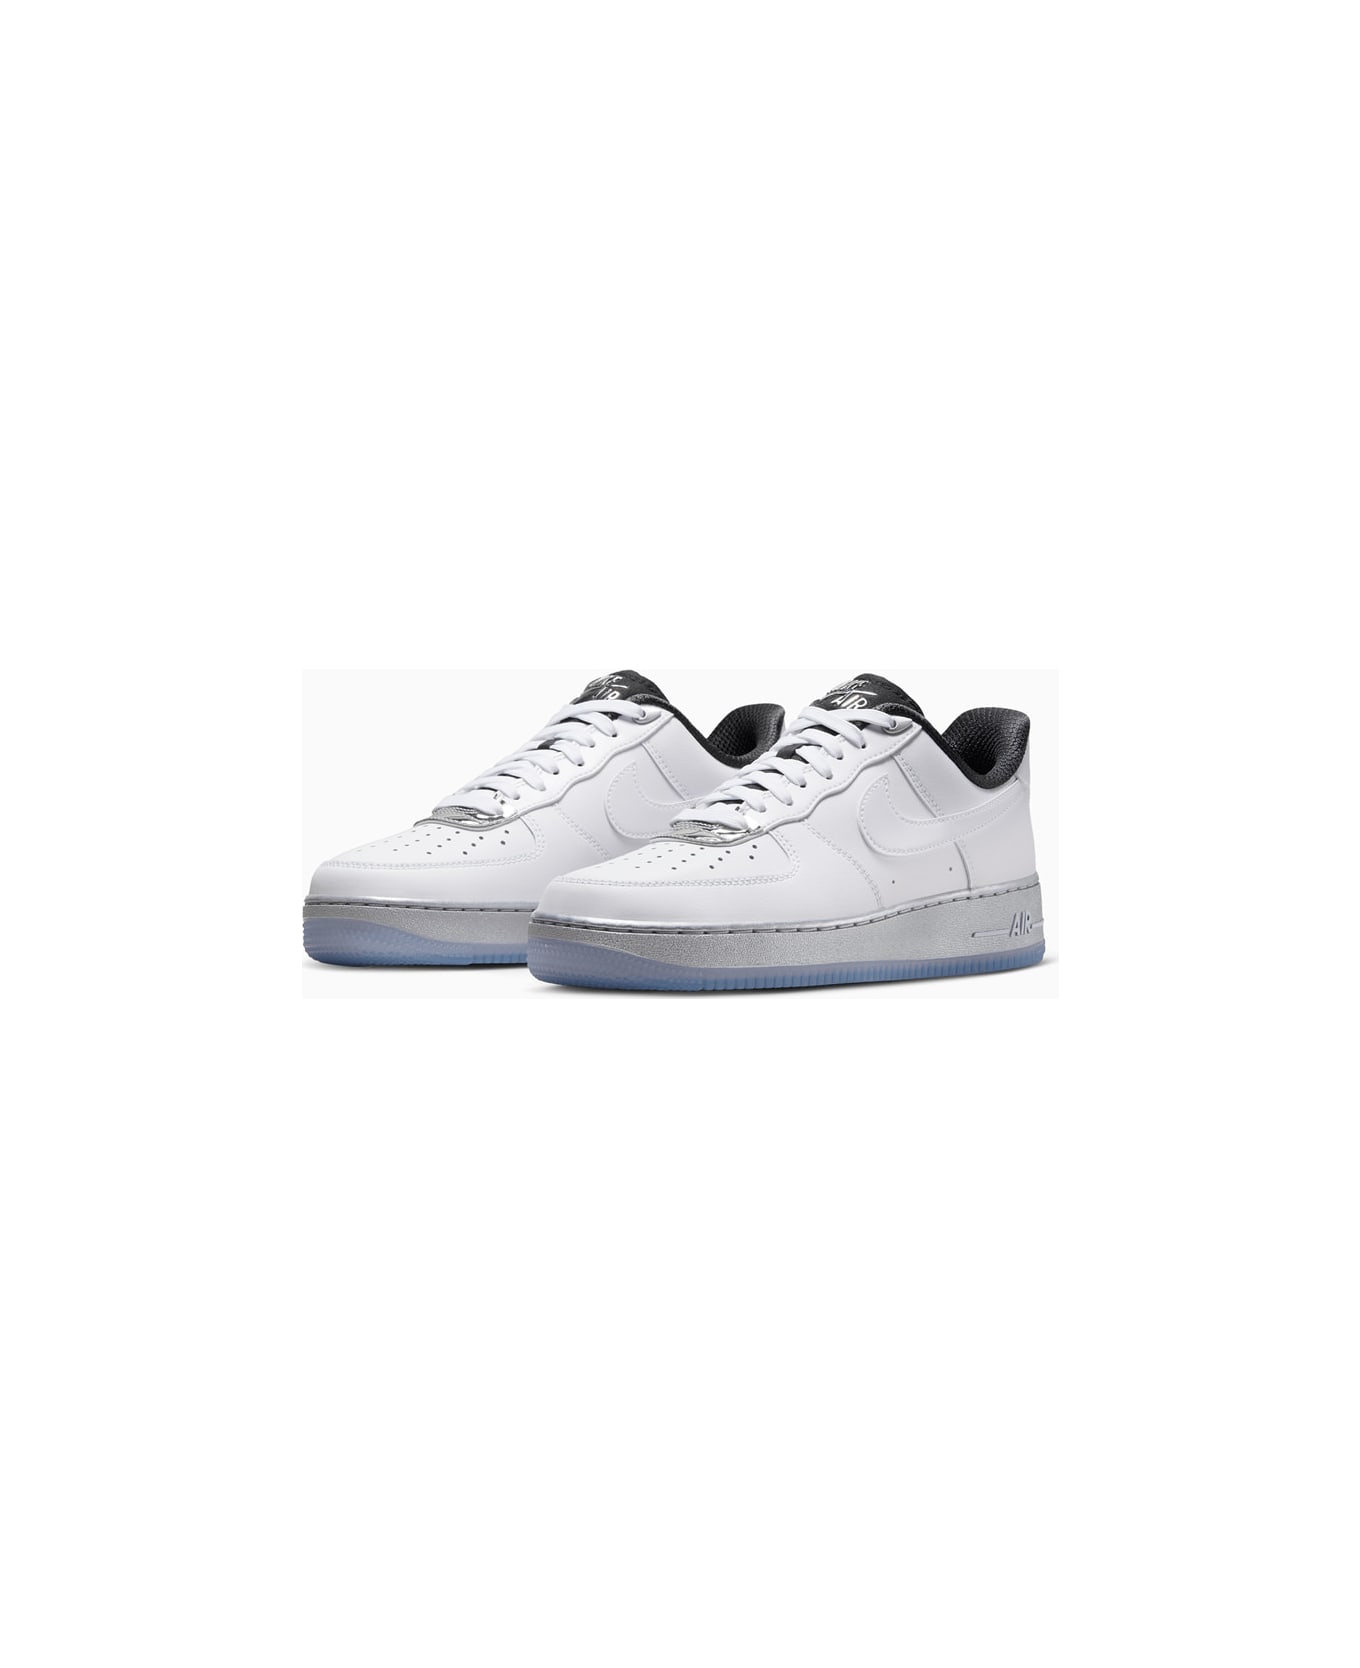 Nike Air Force 1 '07 Se (w) Sneakers Dx6764-100 - White スニーカー